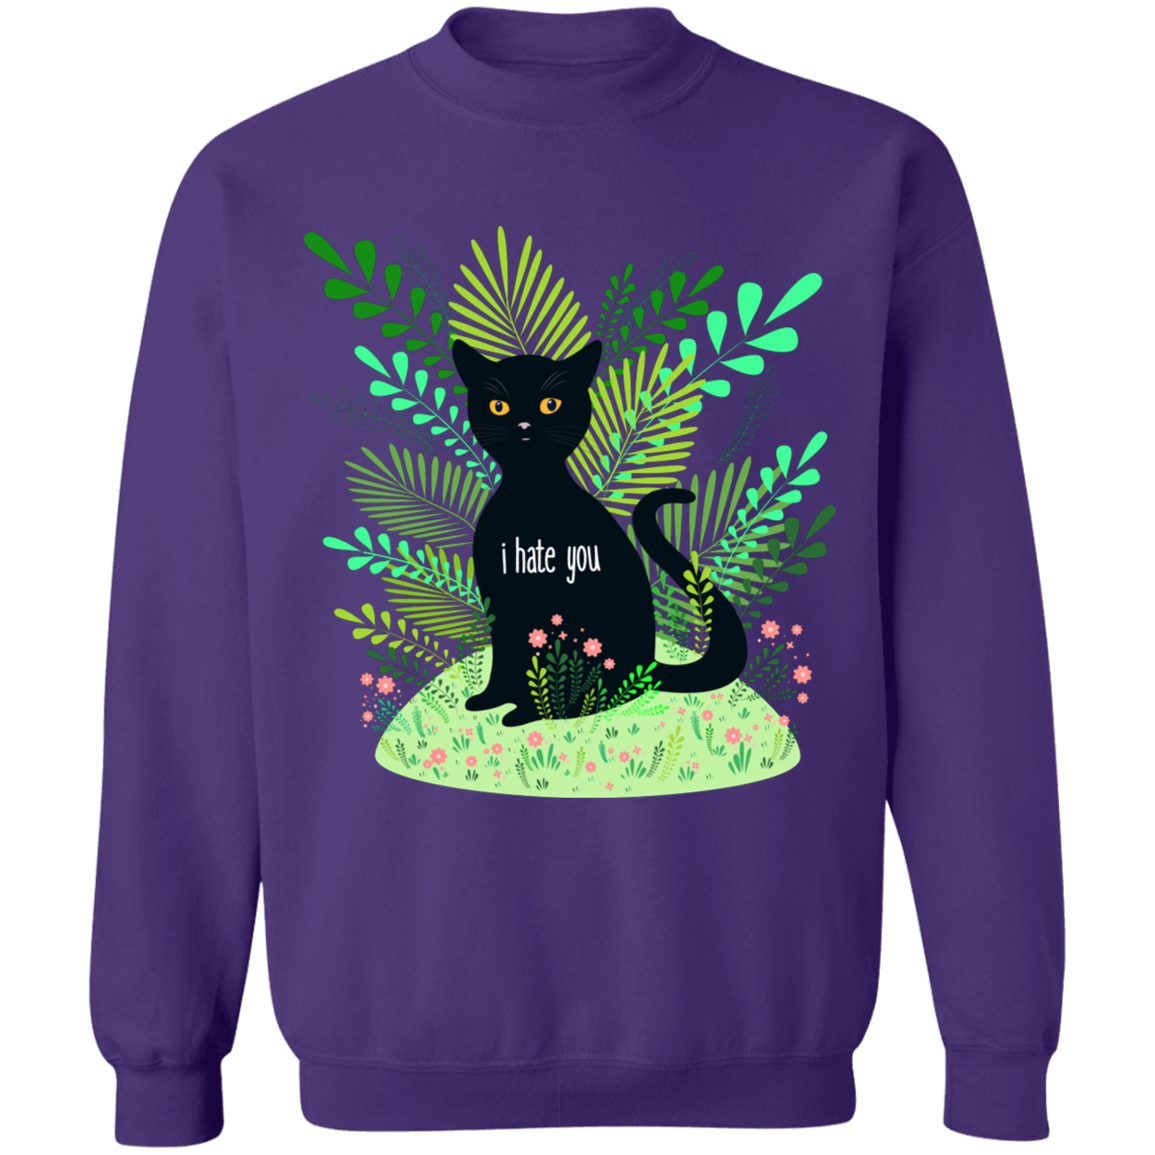 Hate You Crewneck Sweatshirt by palm-treat.myshopify.com for sale online now - the latest Vaporwave &amp; Soft Grunge Clothing